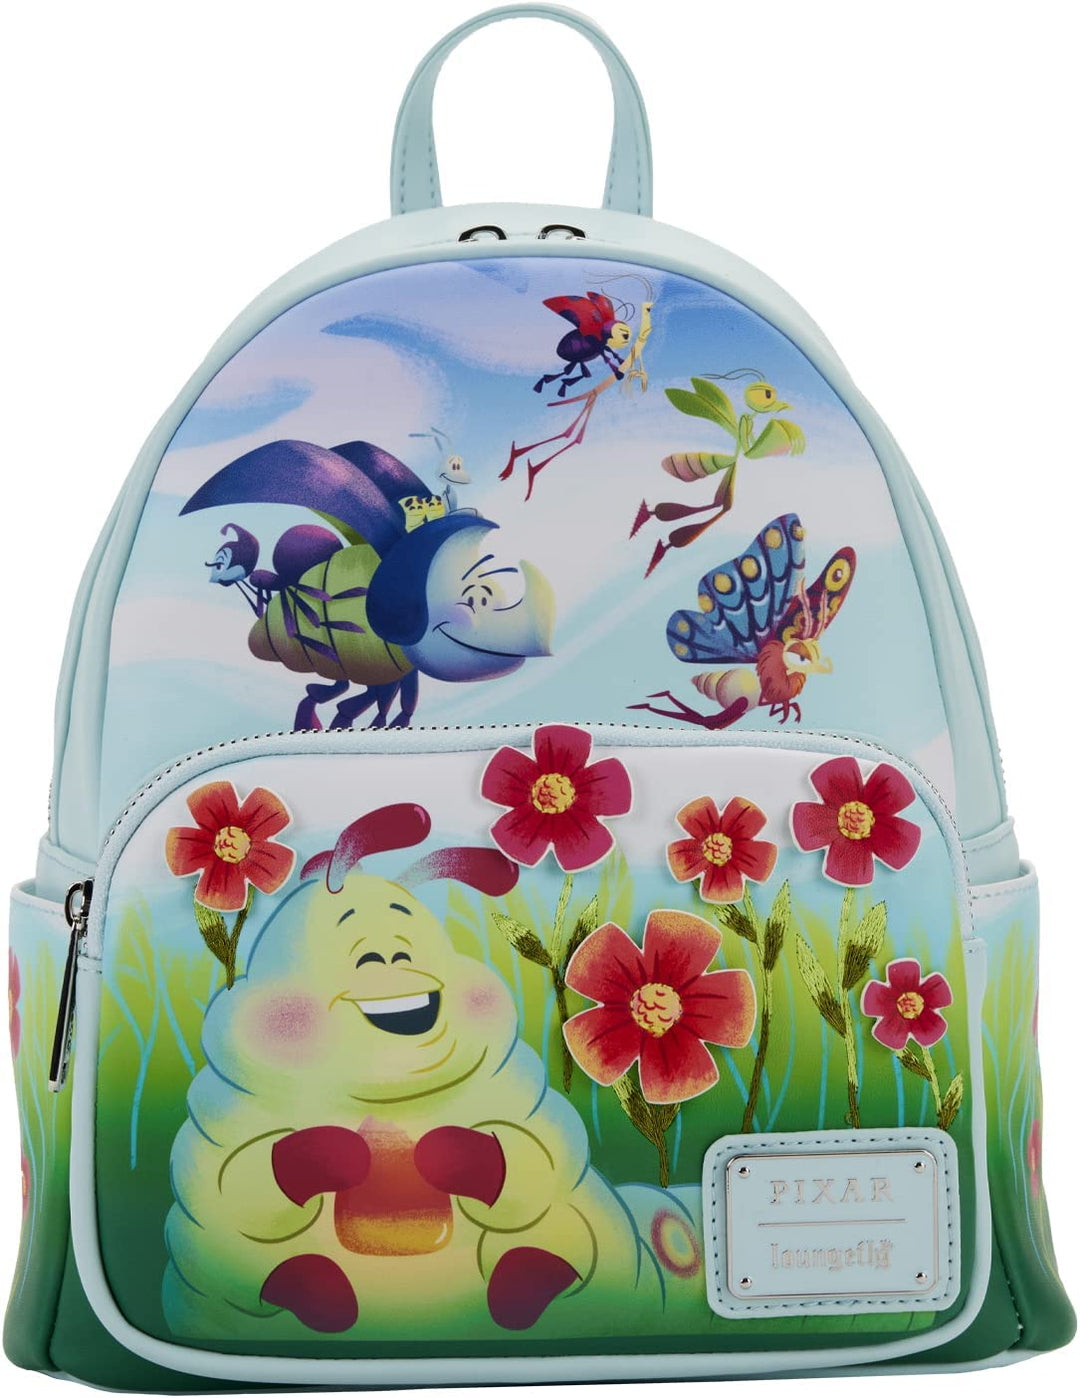 Loungefly Disney Pixar A Bugs Life Earth Day Backpack Shoulder Bag Purse